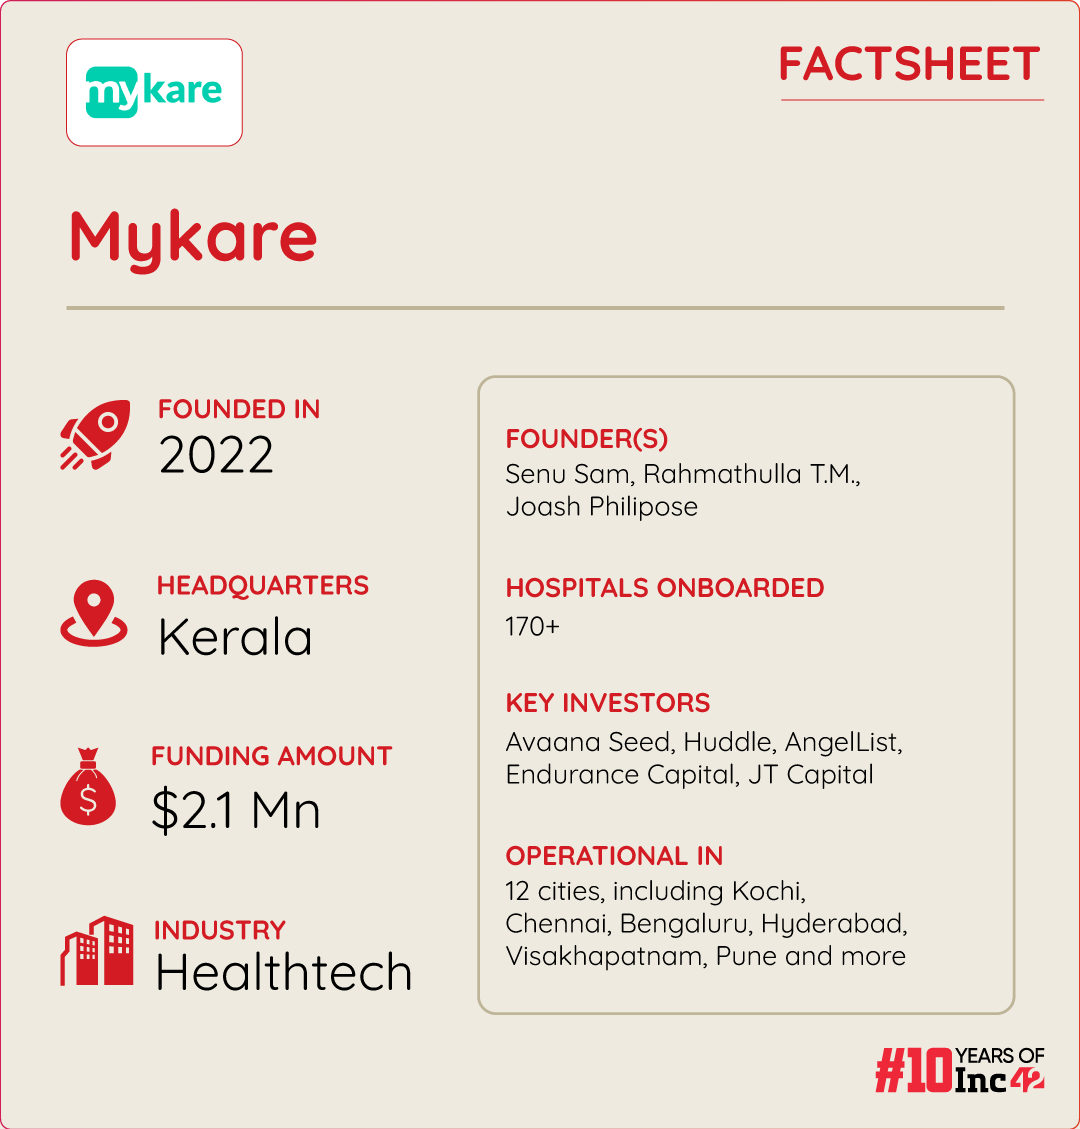 .How Mykare Health Is Boosting Patient Footfall & Revenue For 170+ Small & Midsized Hospitals Across India